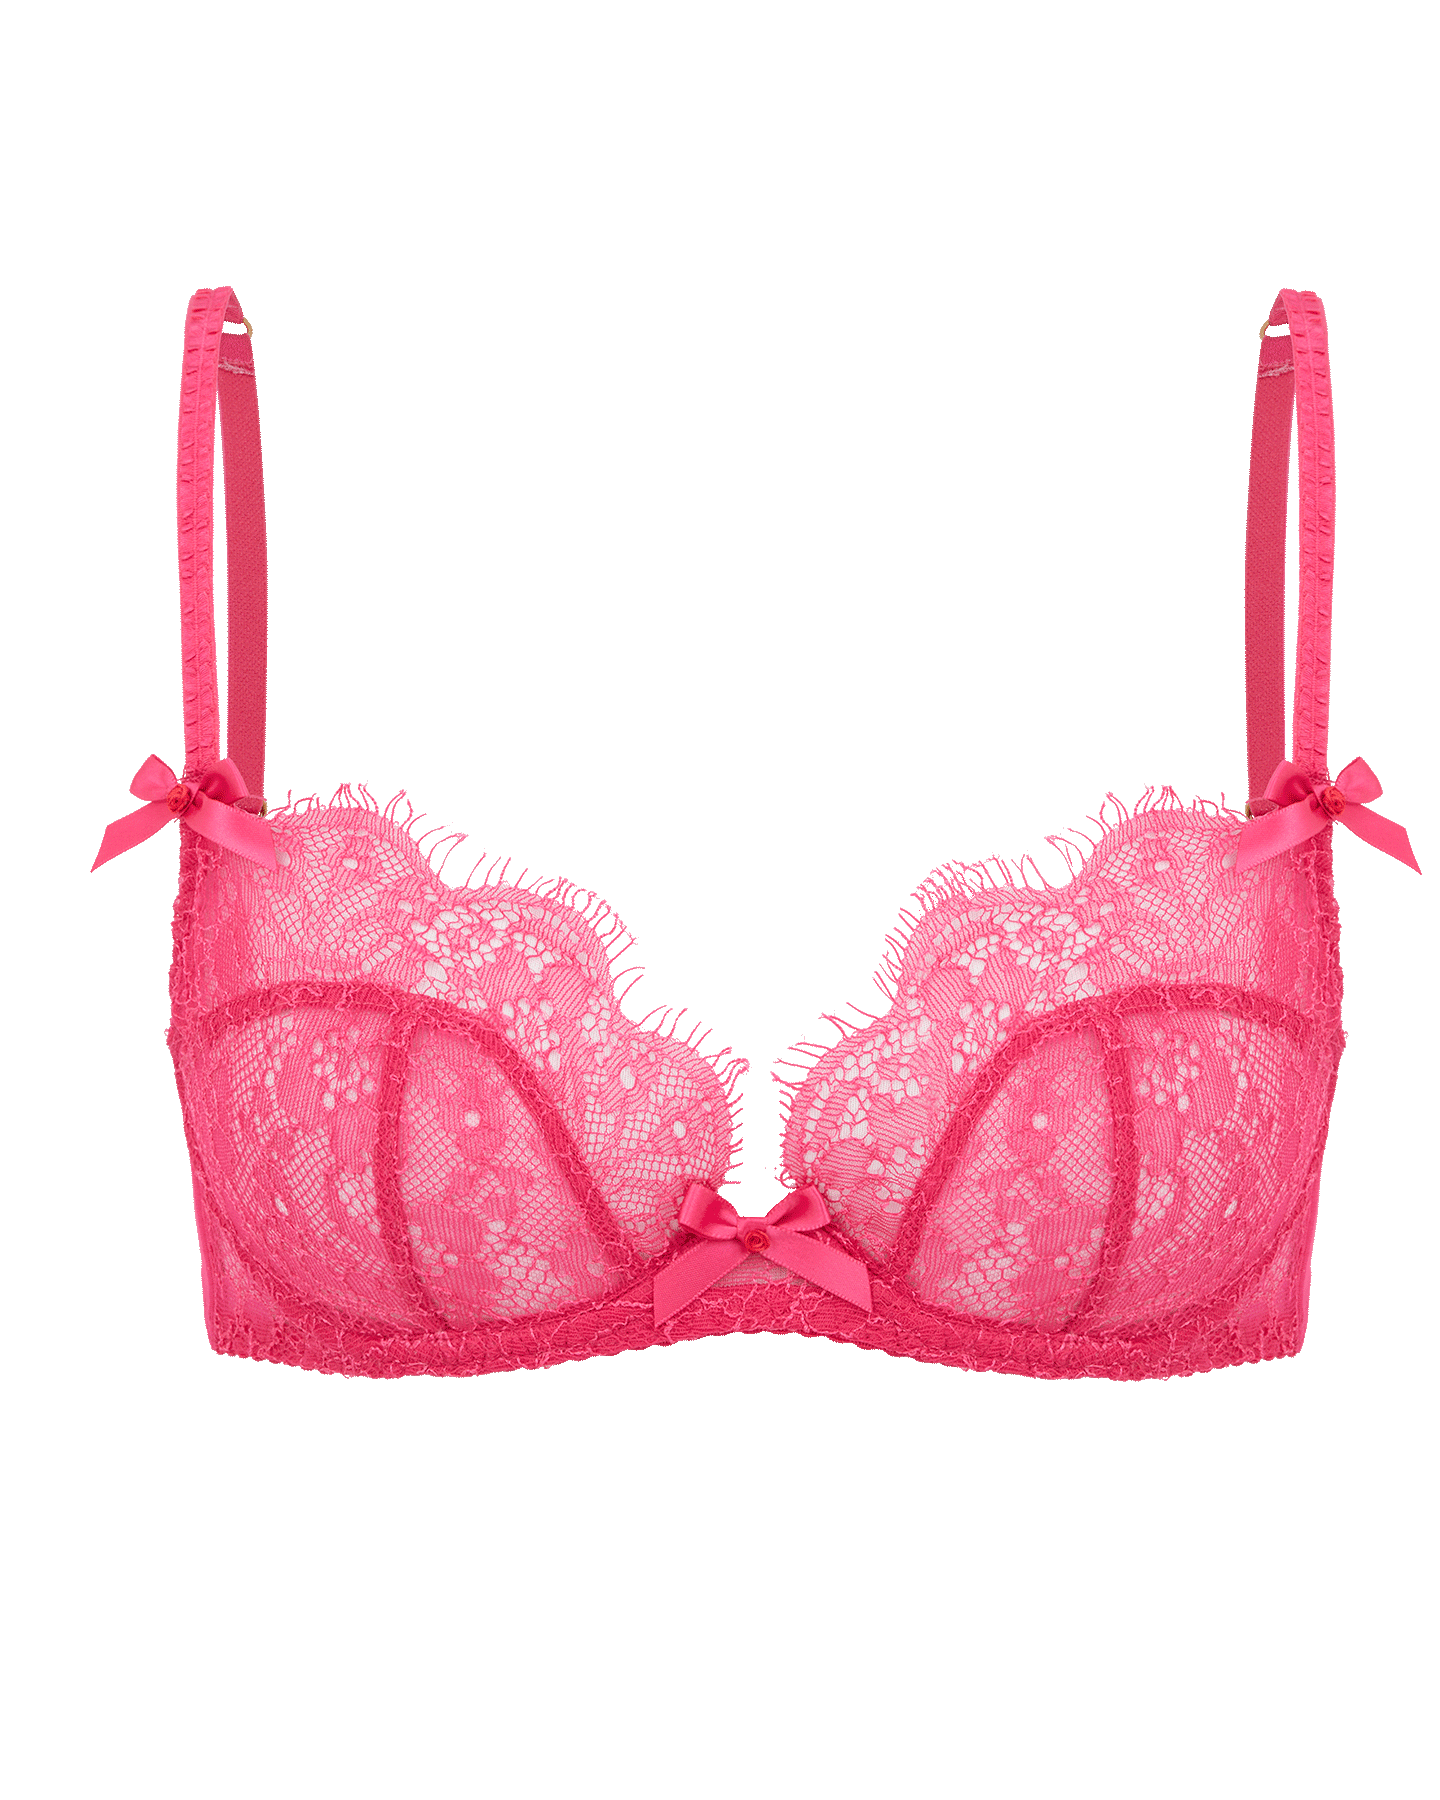 Buy Wunderlove Women's Floral Lace Underwired Padded Bra (Hot Pink